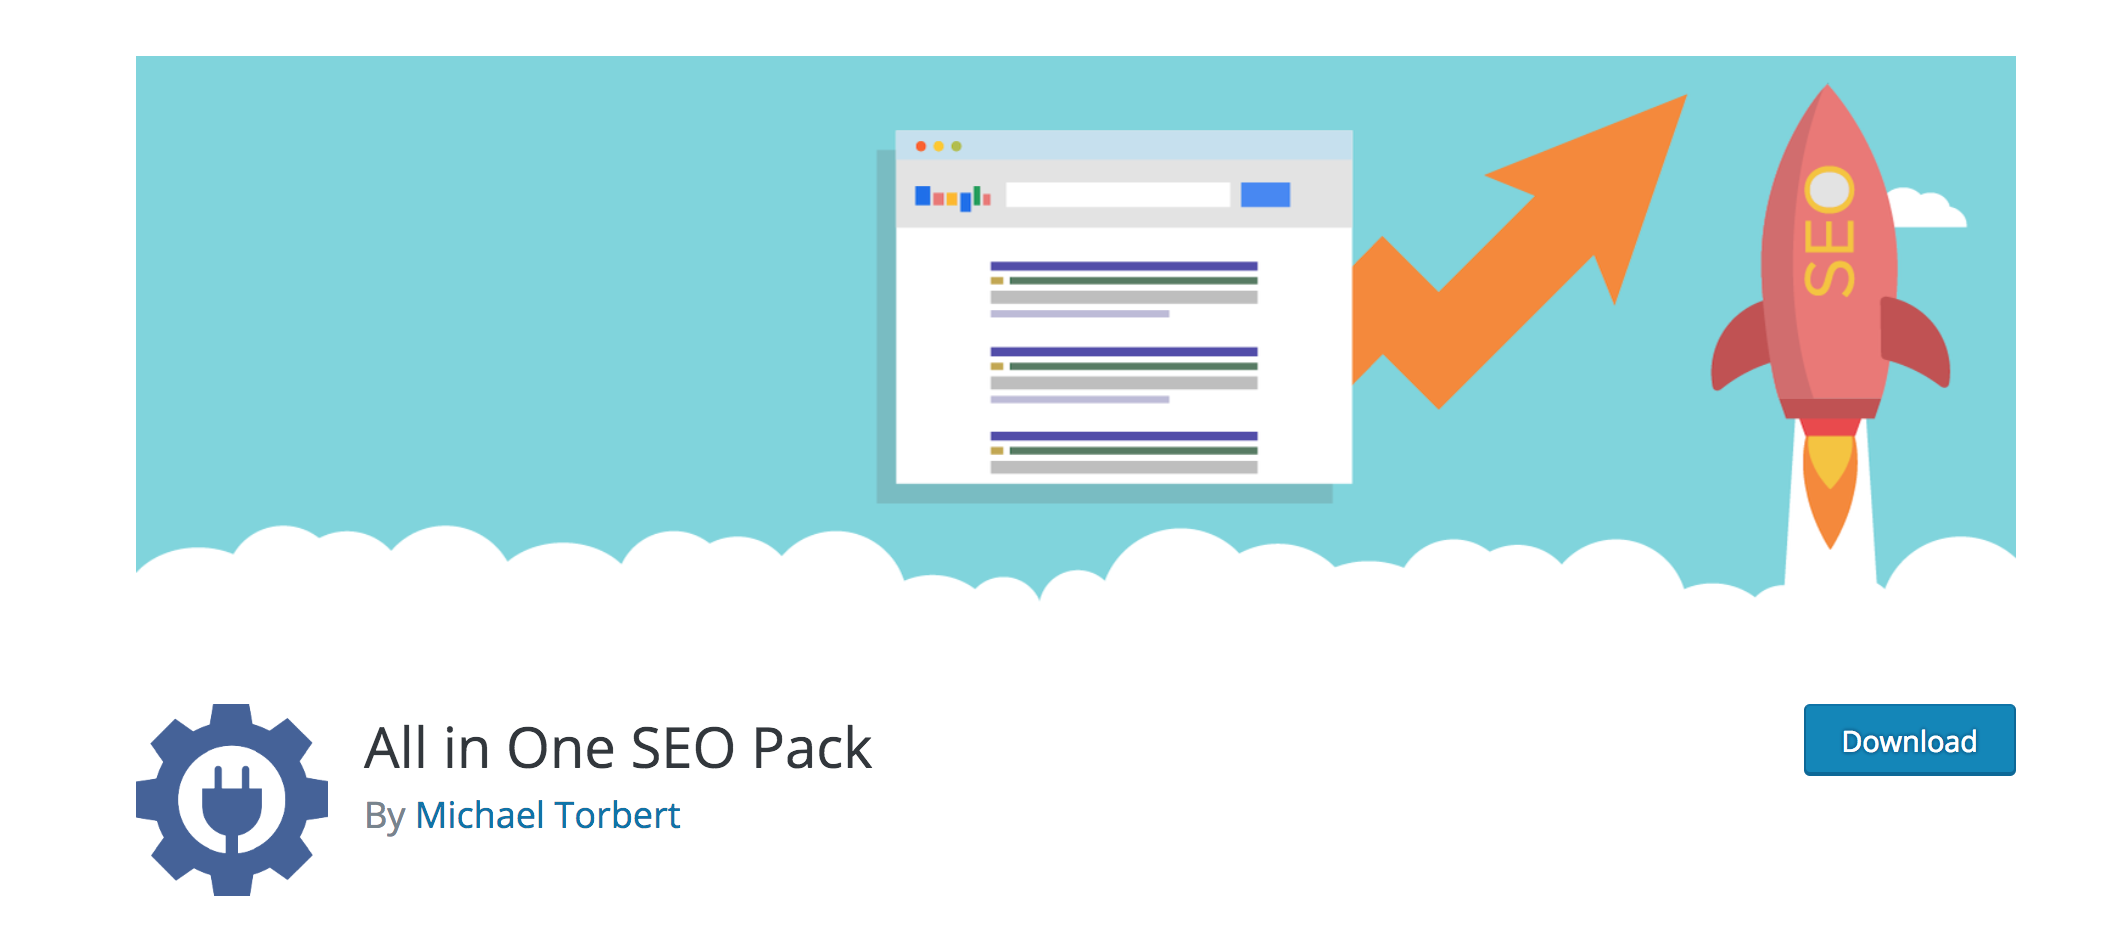 All in One SEO pack